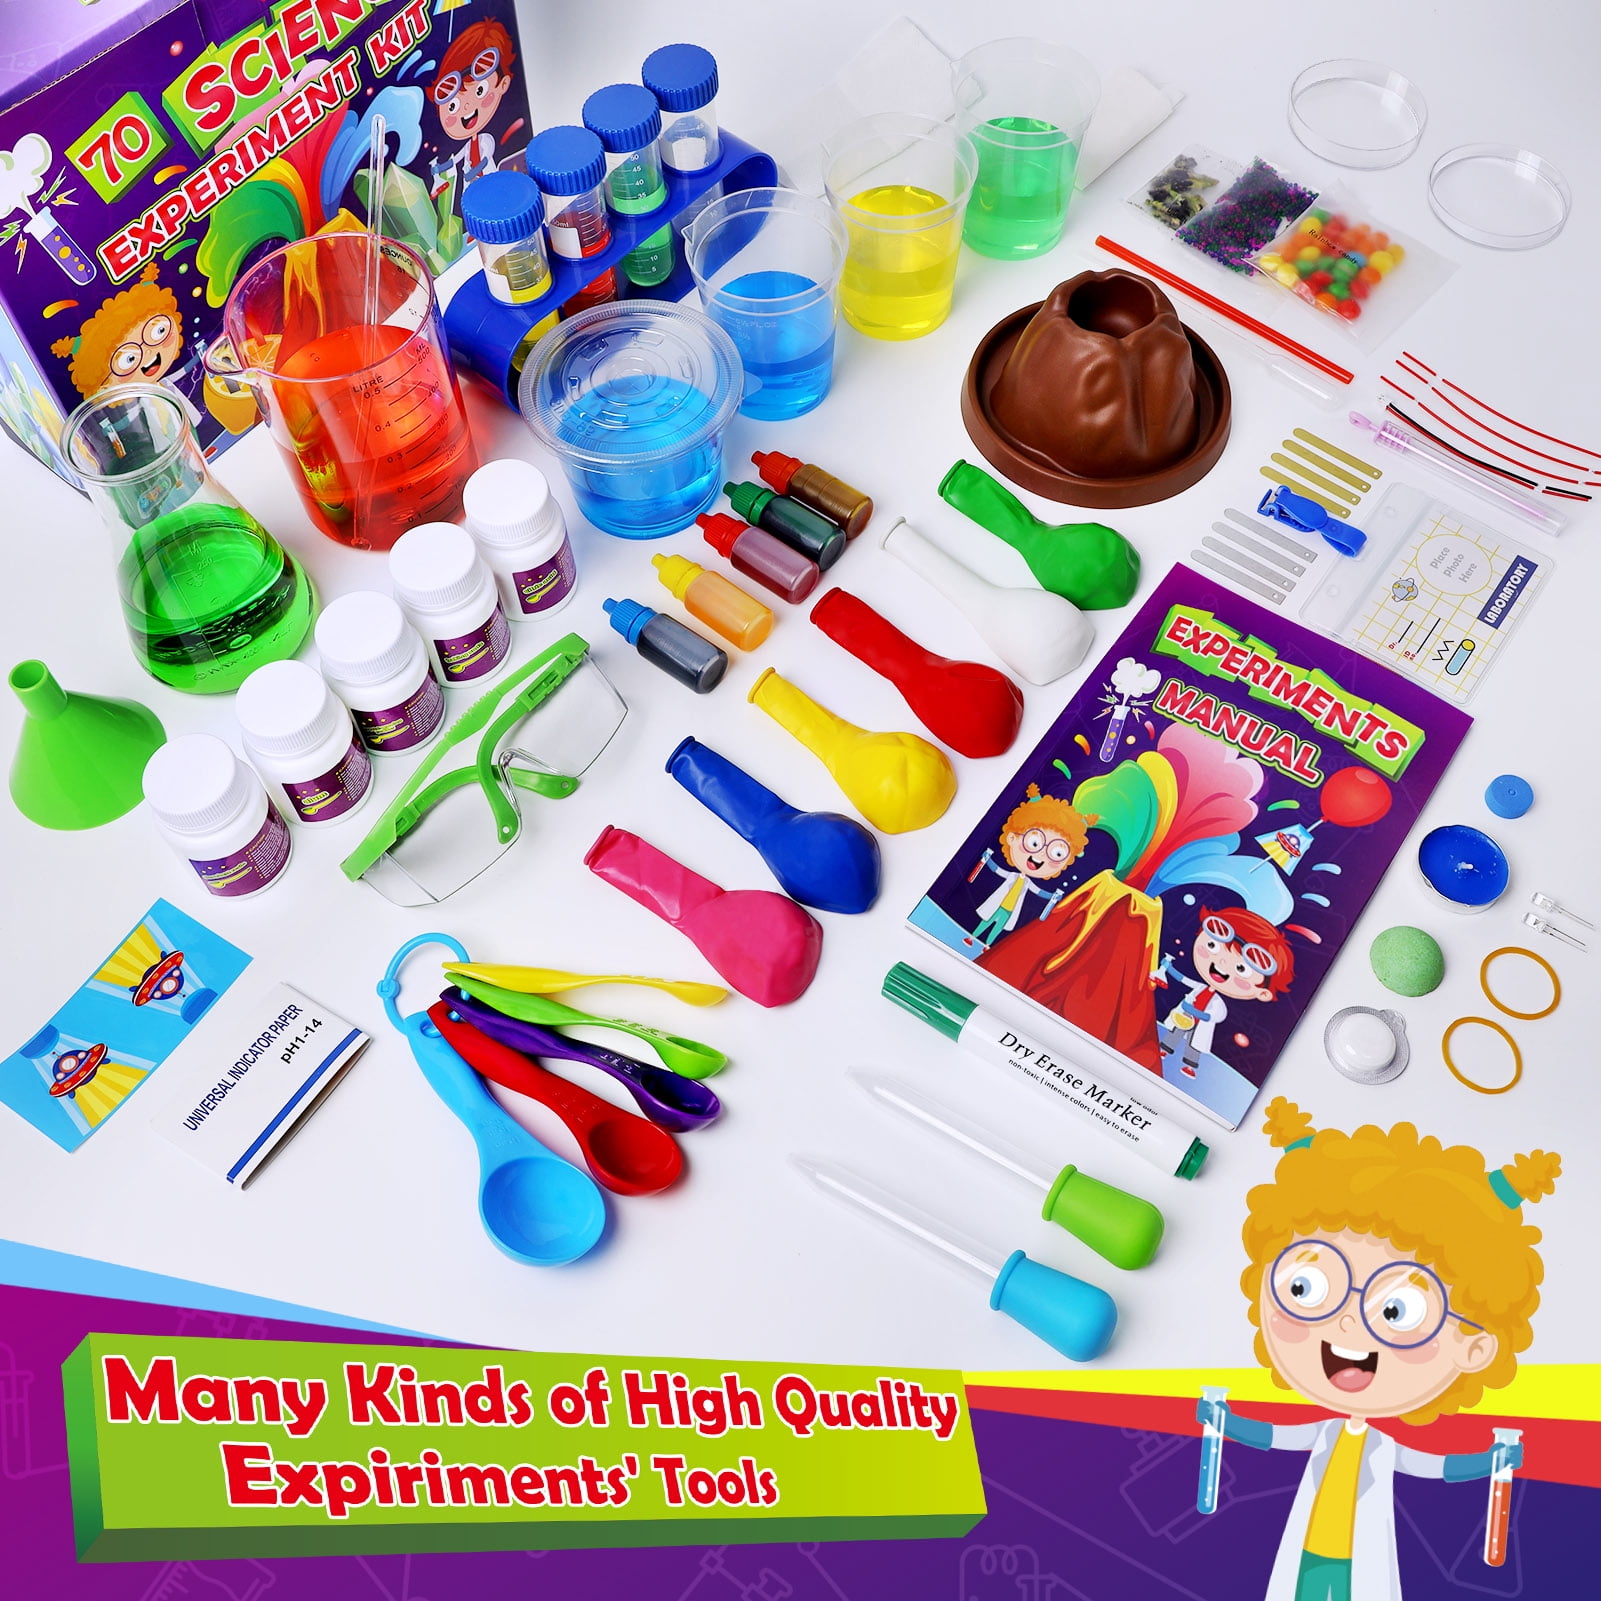 30+ Experiments Science Kits Kids Age 4-6-8-10-12 Educational STEM Project  Toys - Helia Beer Co